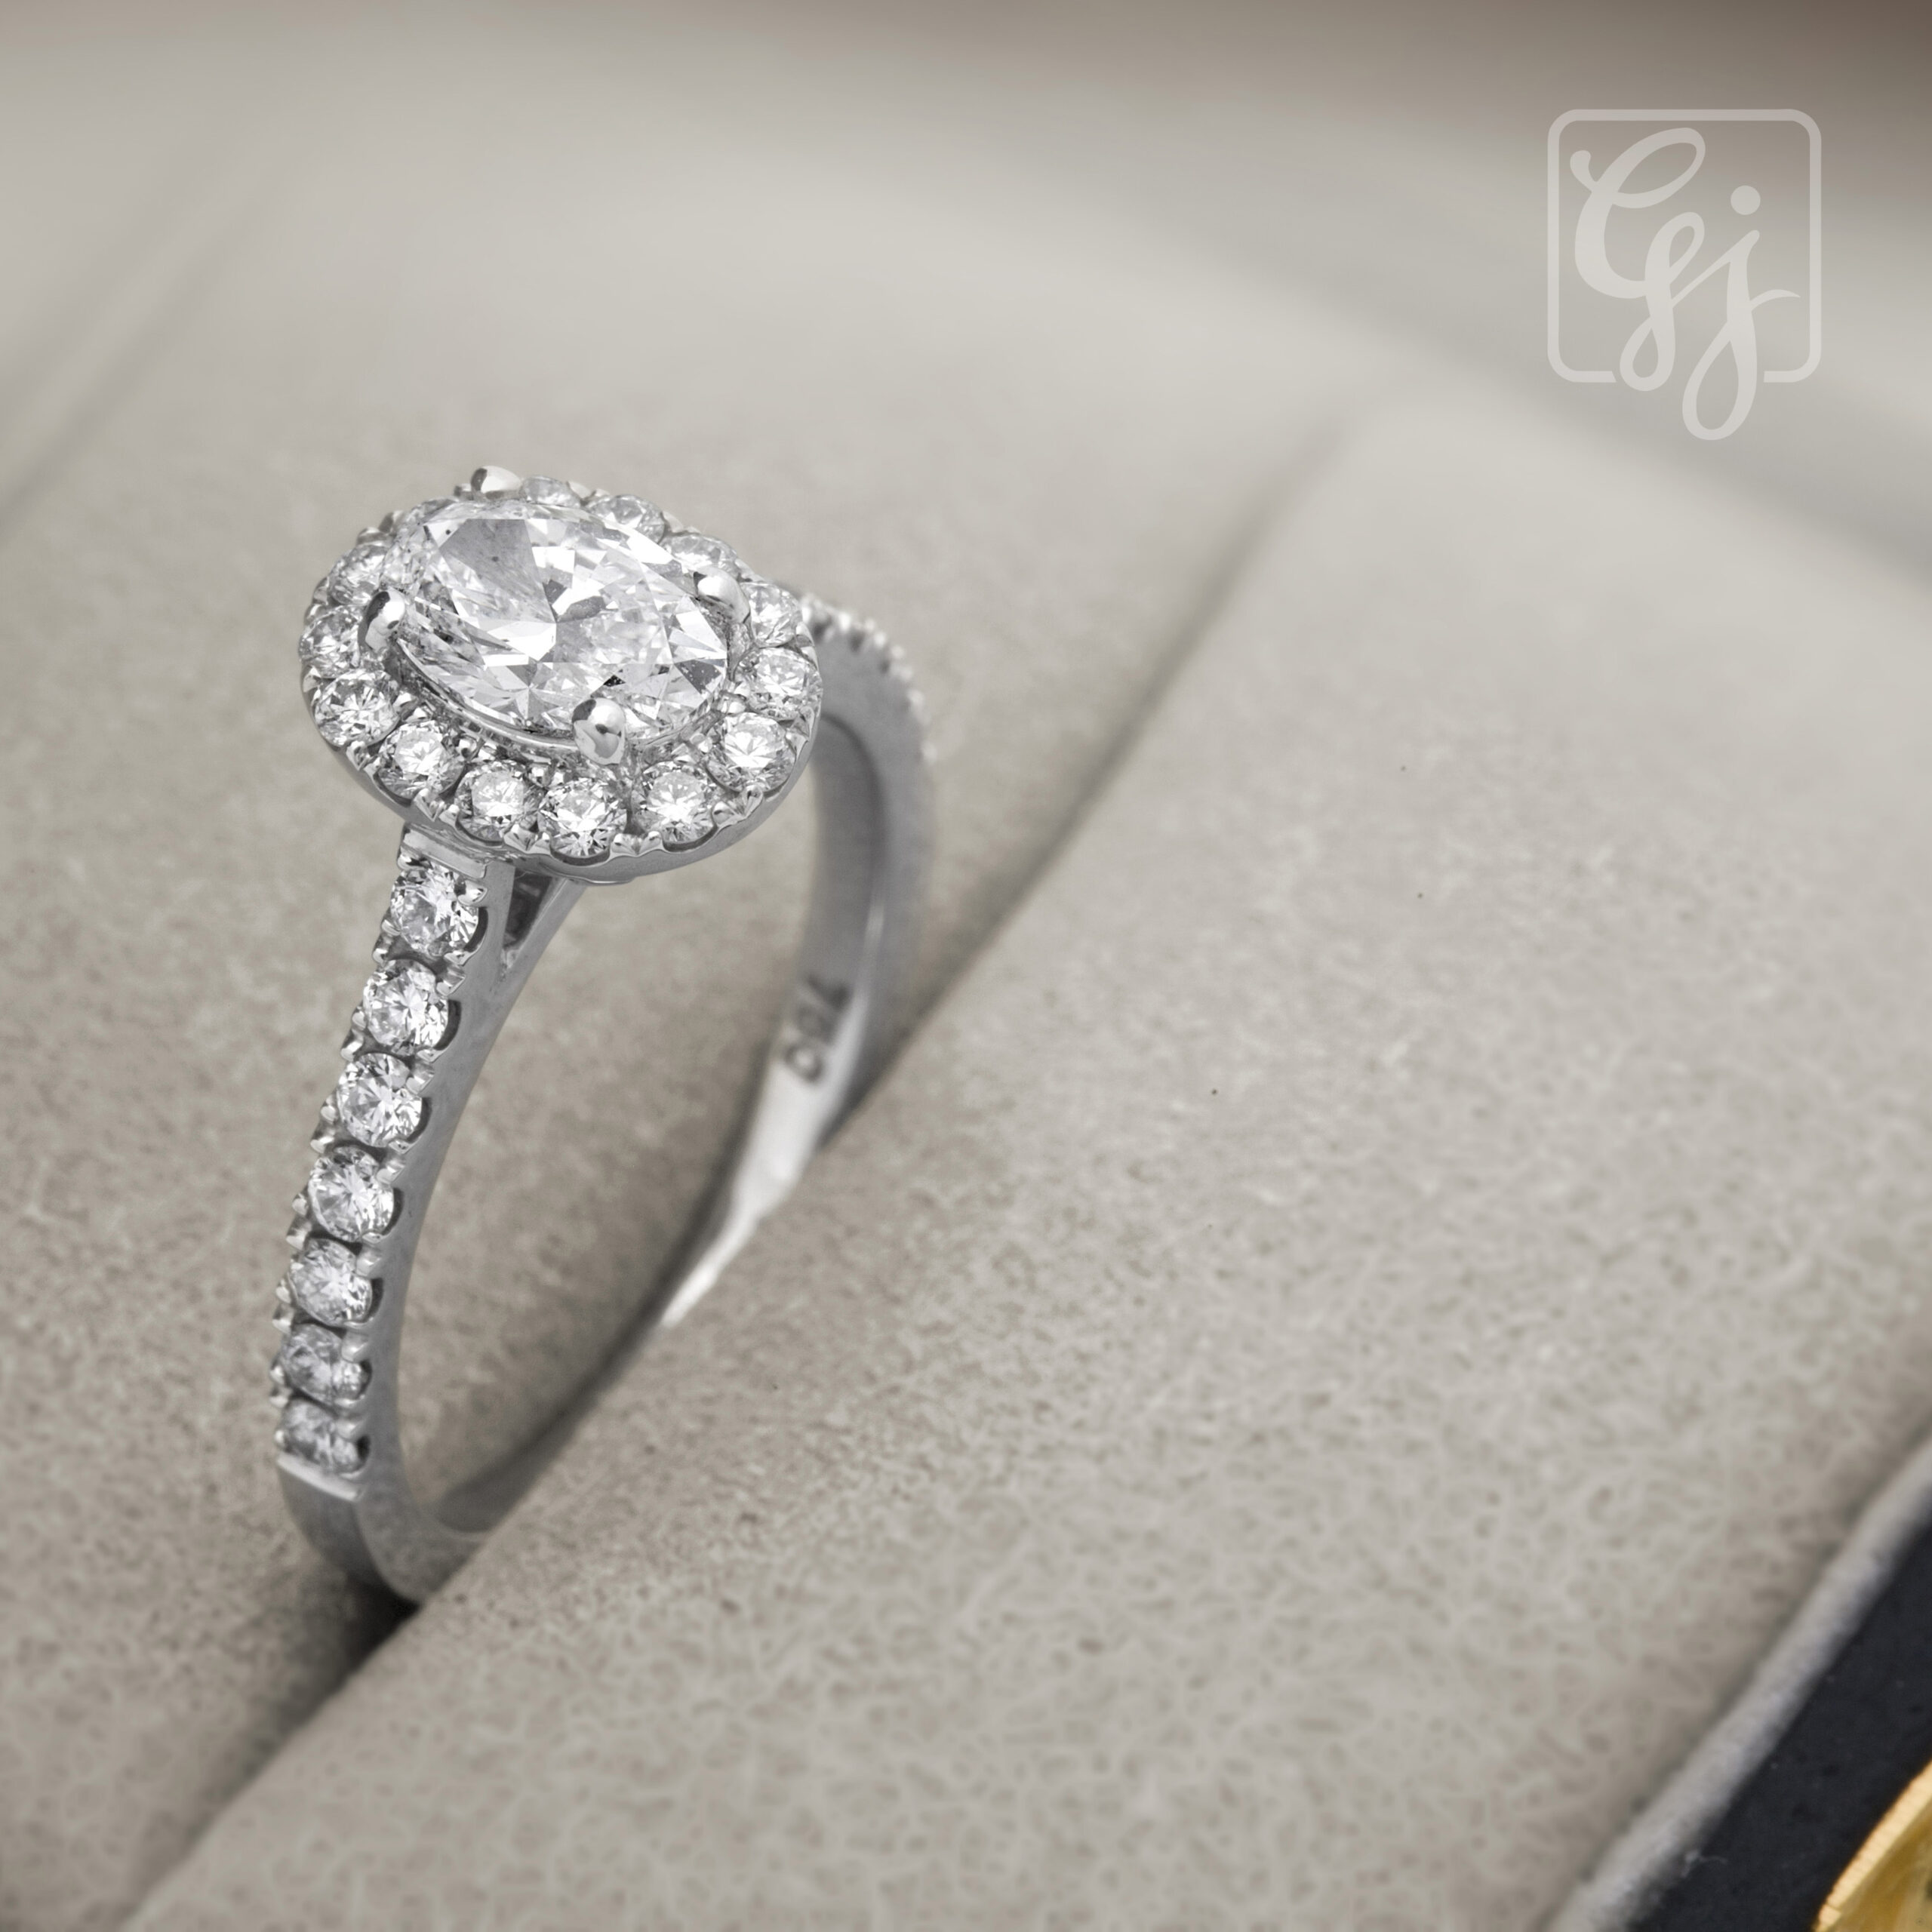 Match Your Mood with Every Ring: Find Your Perfect Types of Ring for Every Occasion!